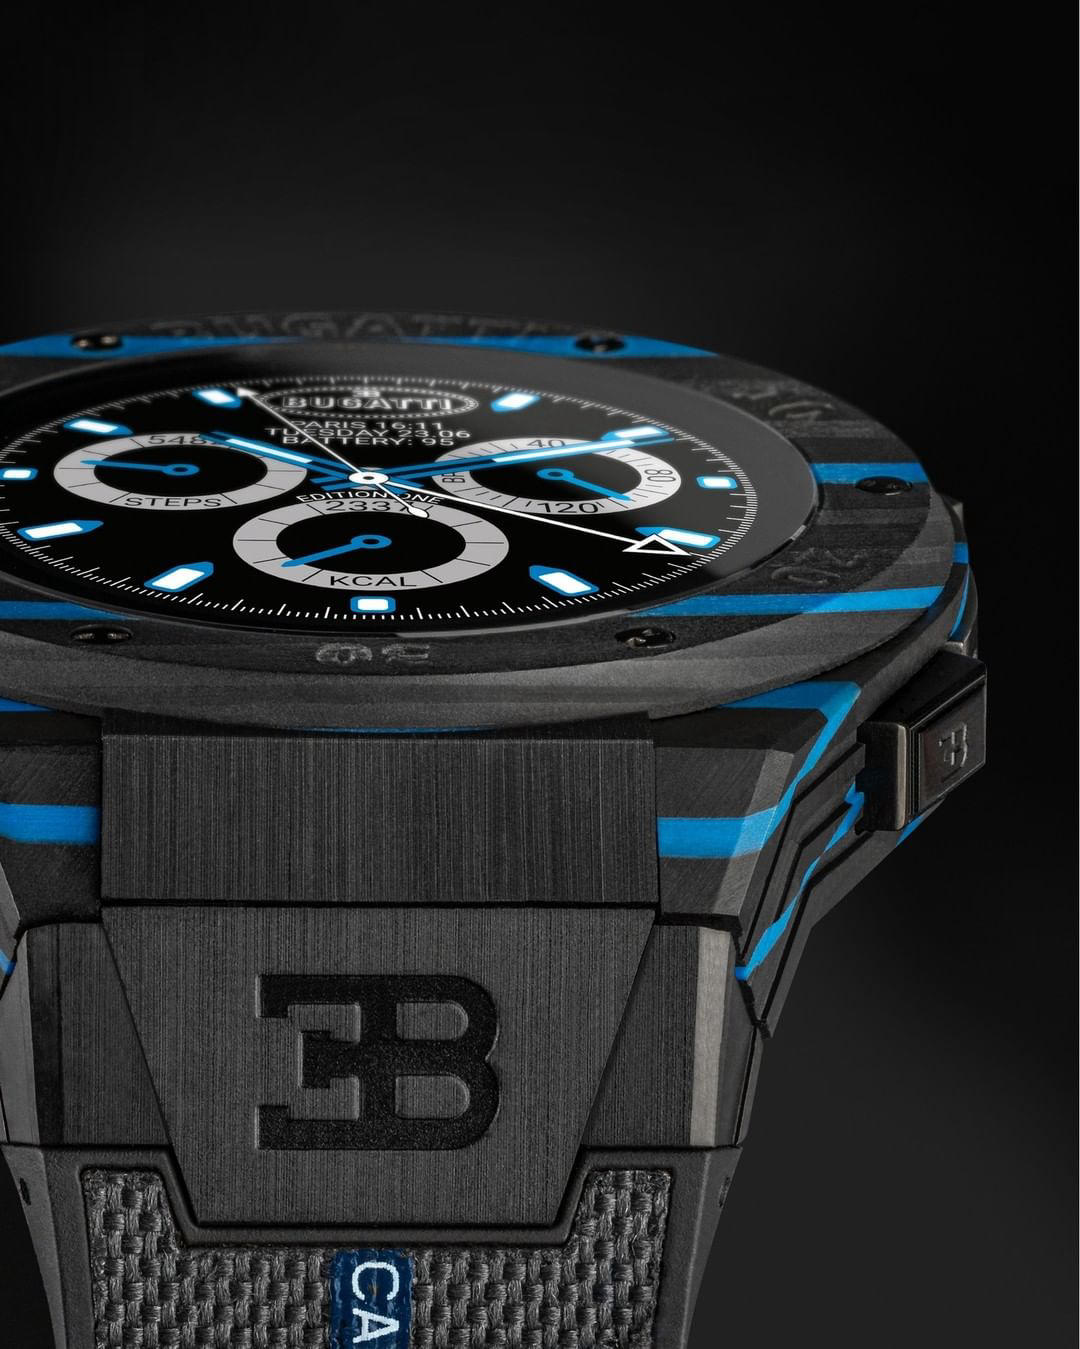 BUGATTI - BUGATTI is renowned for pushing the boundaries of design and engineering, and no exception